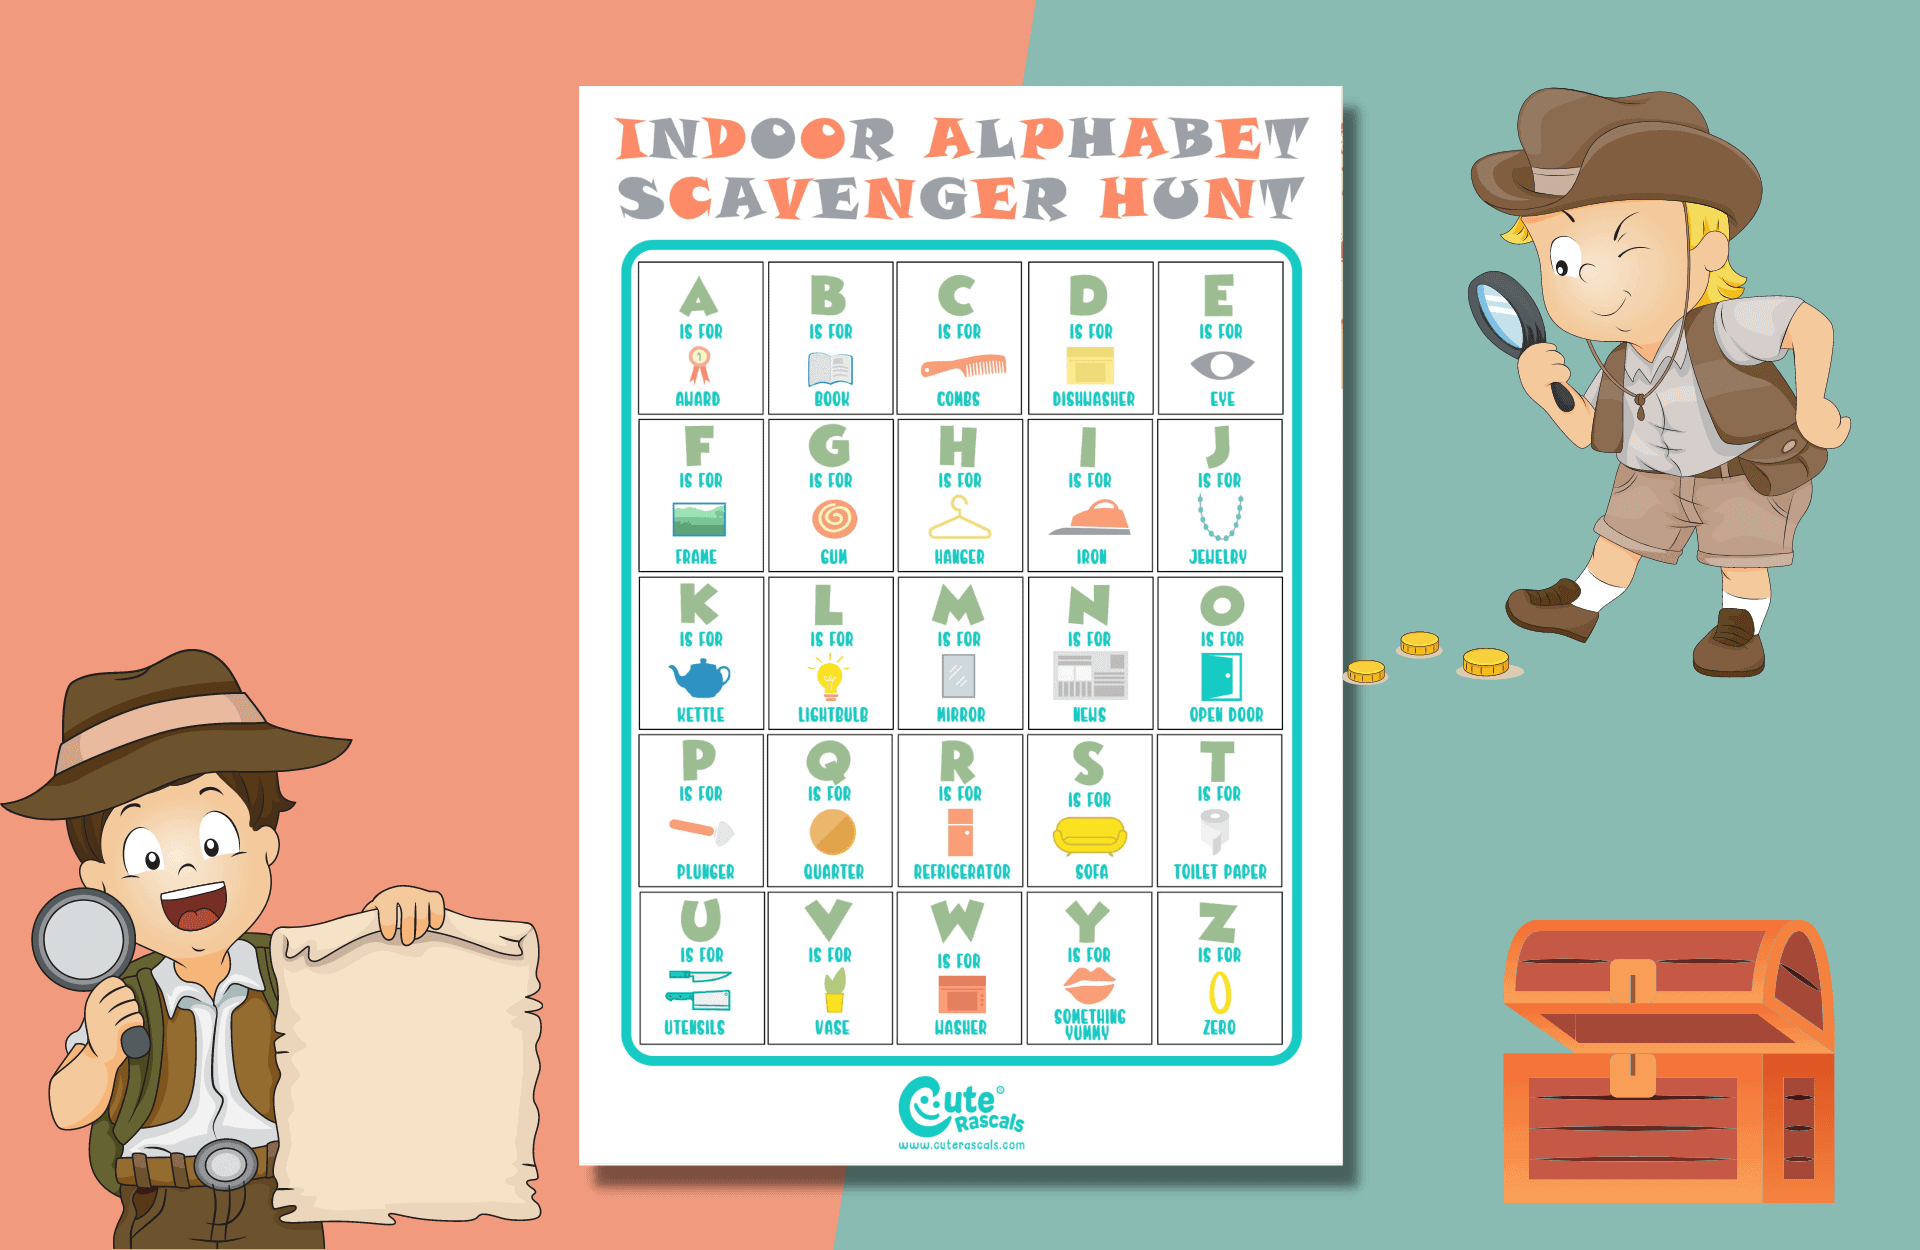 Find The Alphabets: Easy And Fun Indoor Scavenger Hunt For Kids